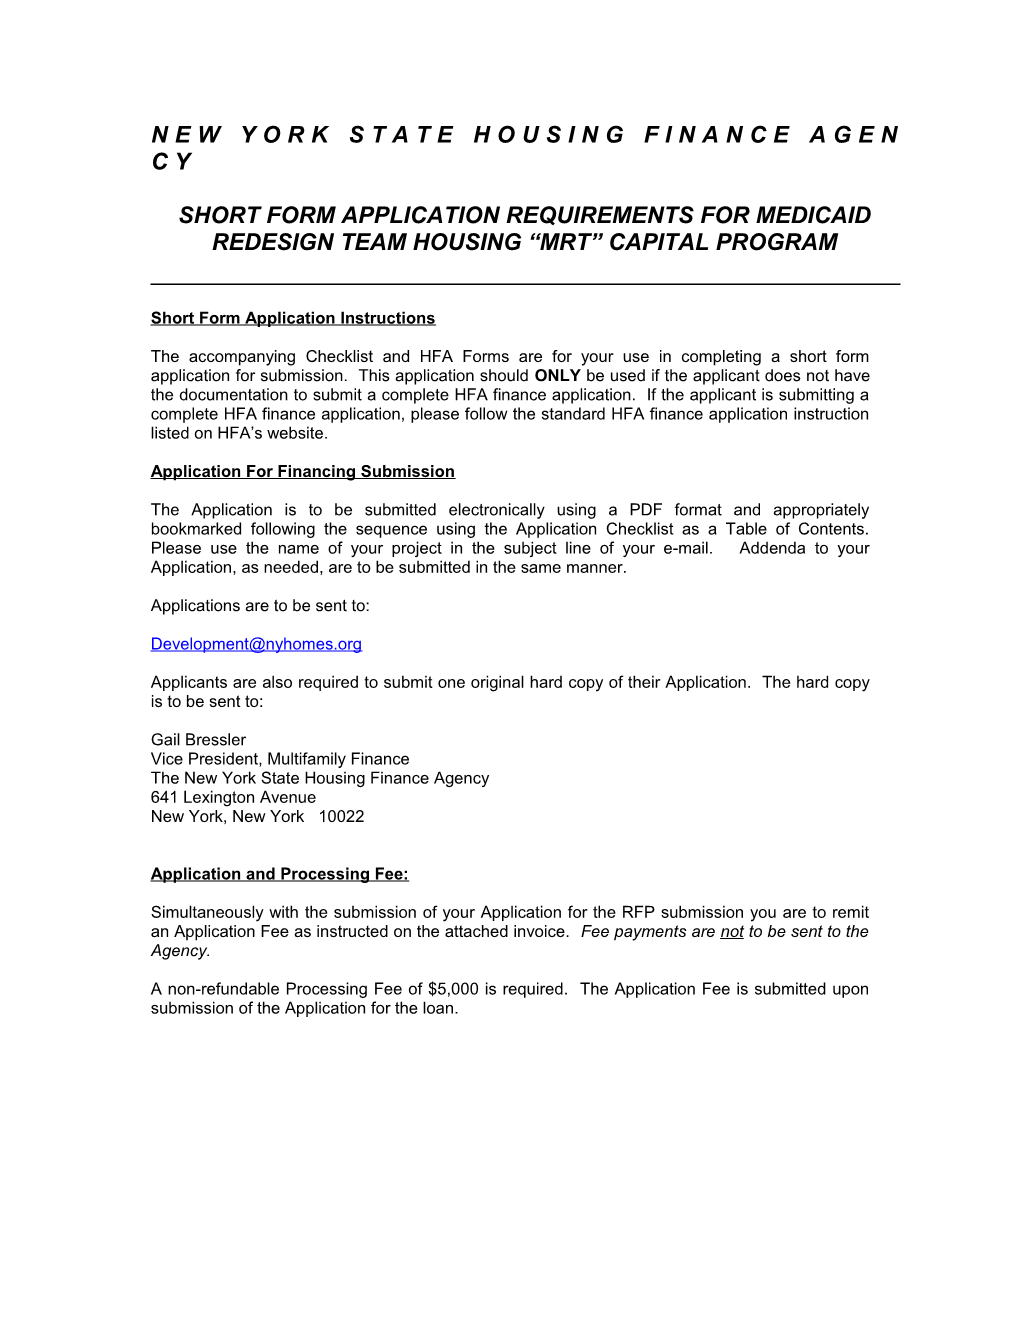 Short Form Application Requirements for Medicaid Redesign Team Housing Mrt Capital Program